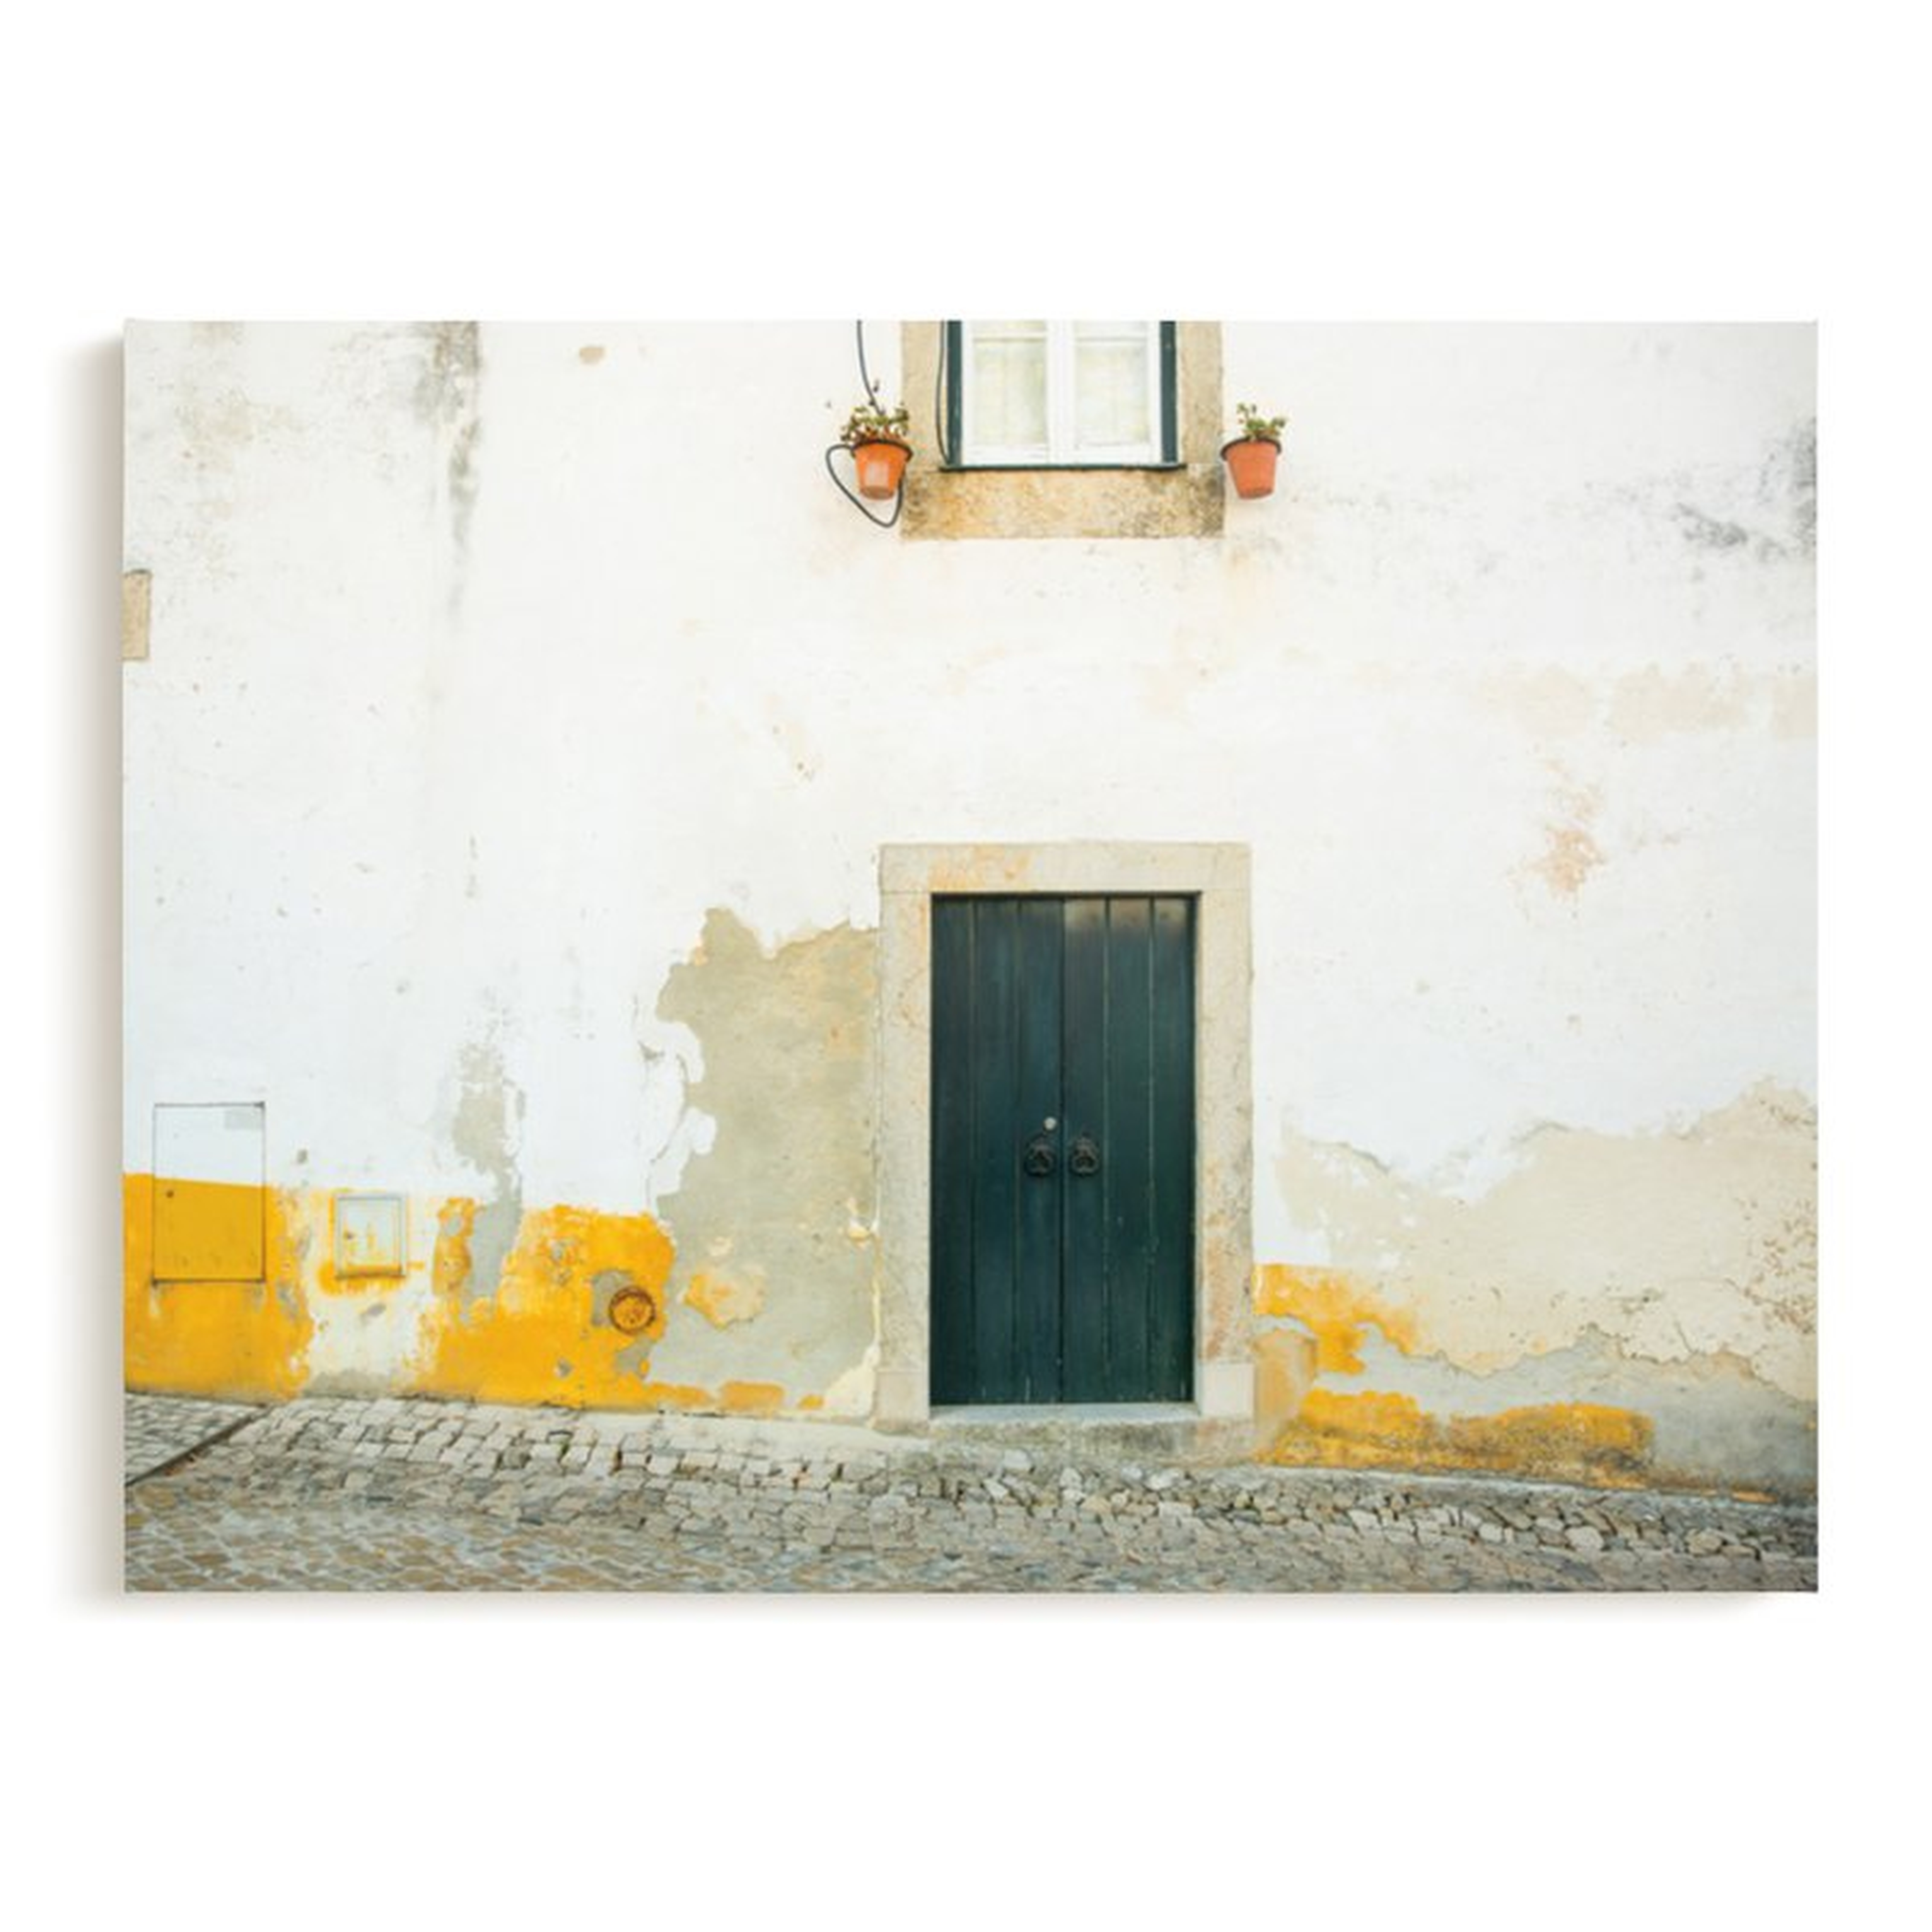 Óbidos  Limited Edition Art, 40" X 30", CANVAS - Minted